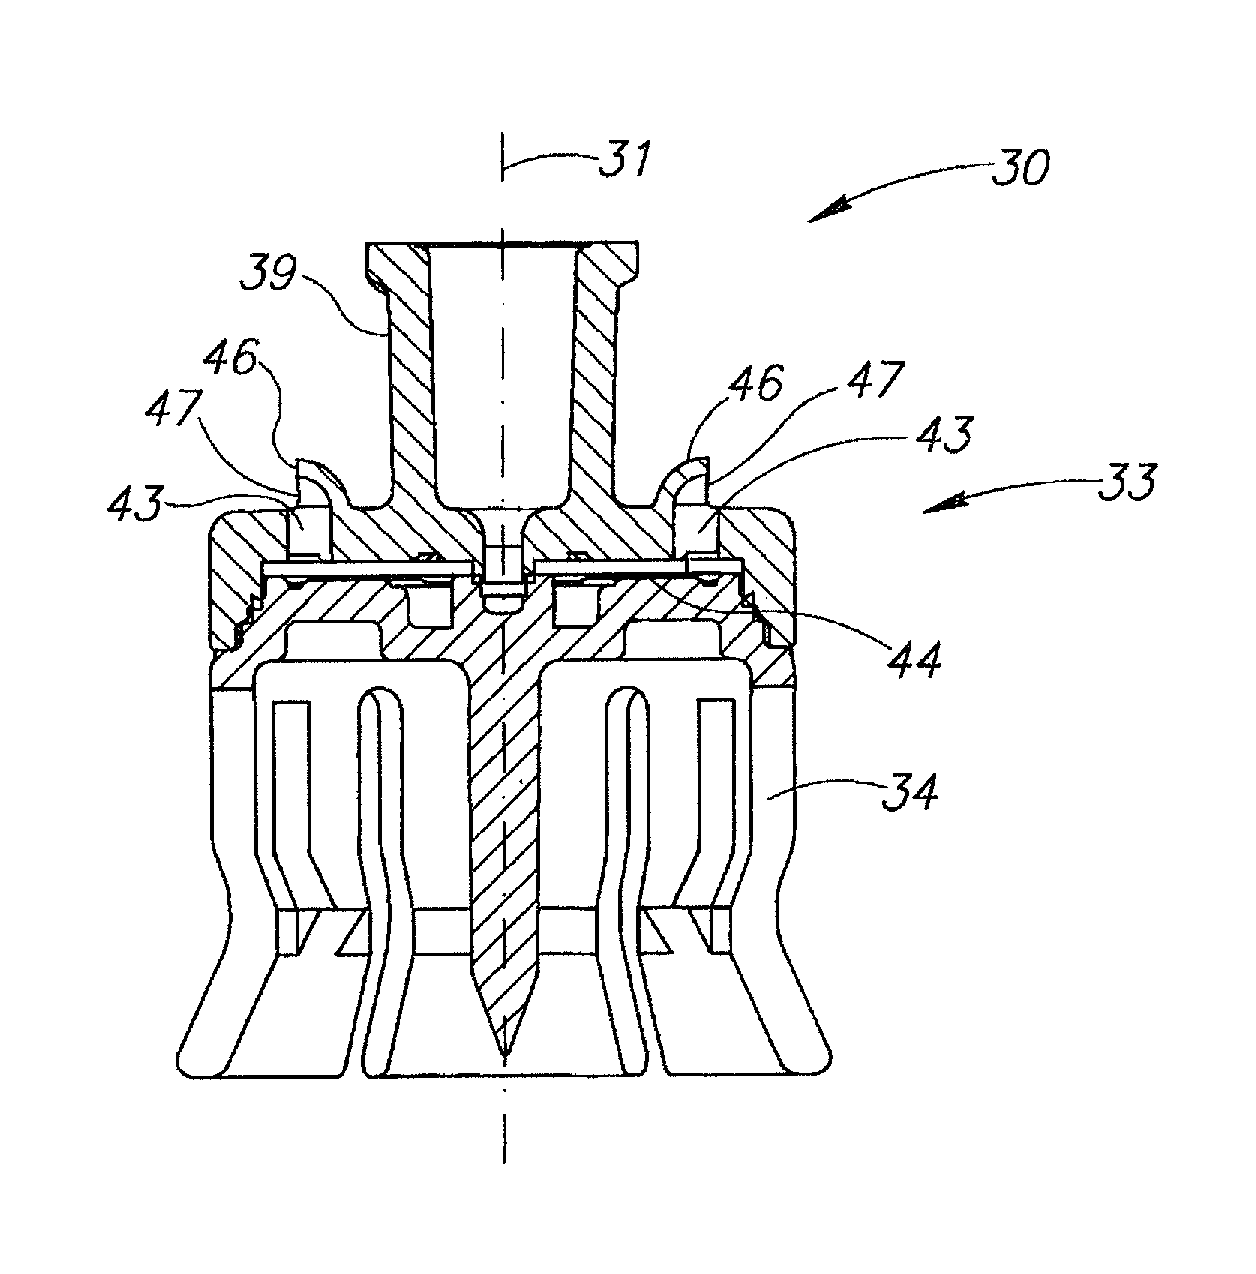 Liquid drug transfer device with vented vial adapter